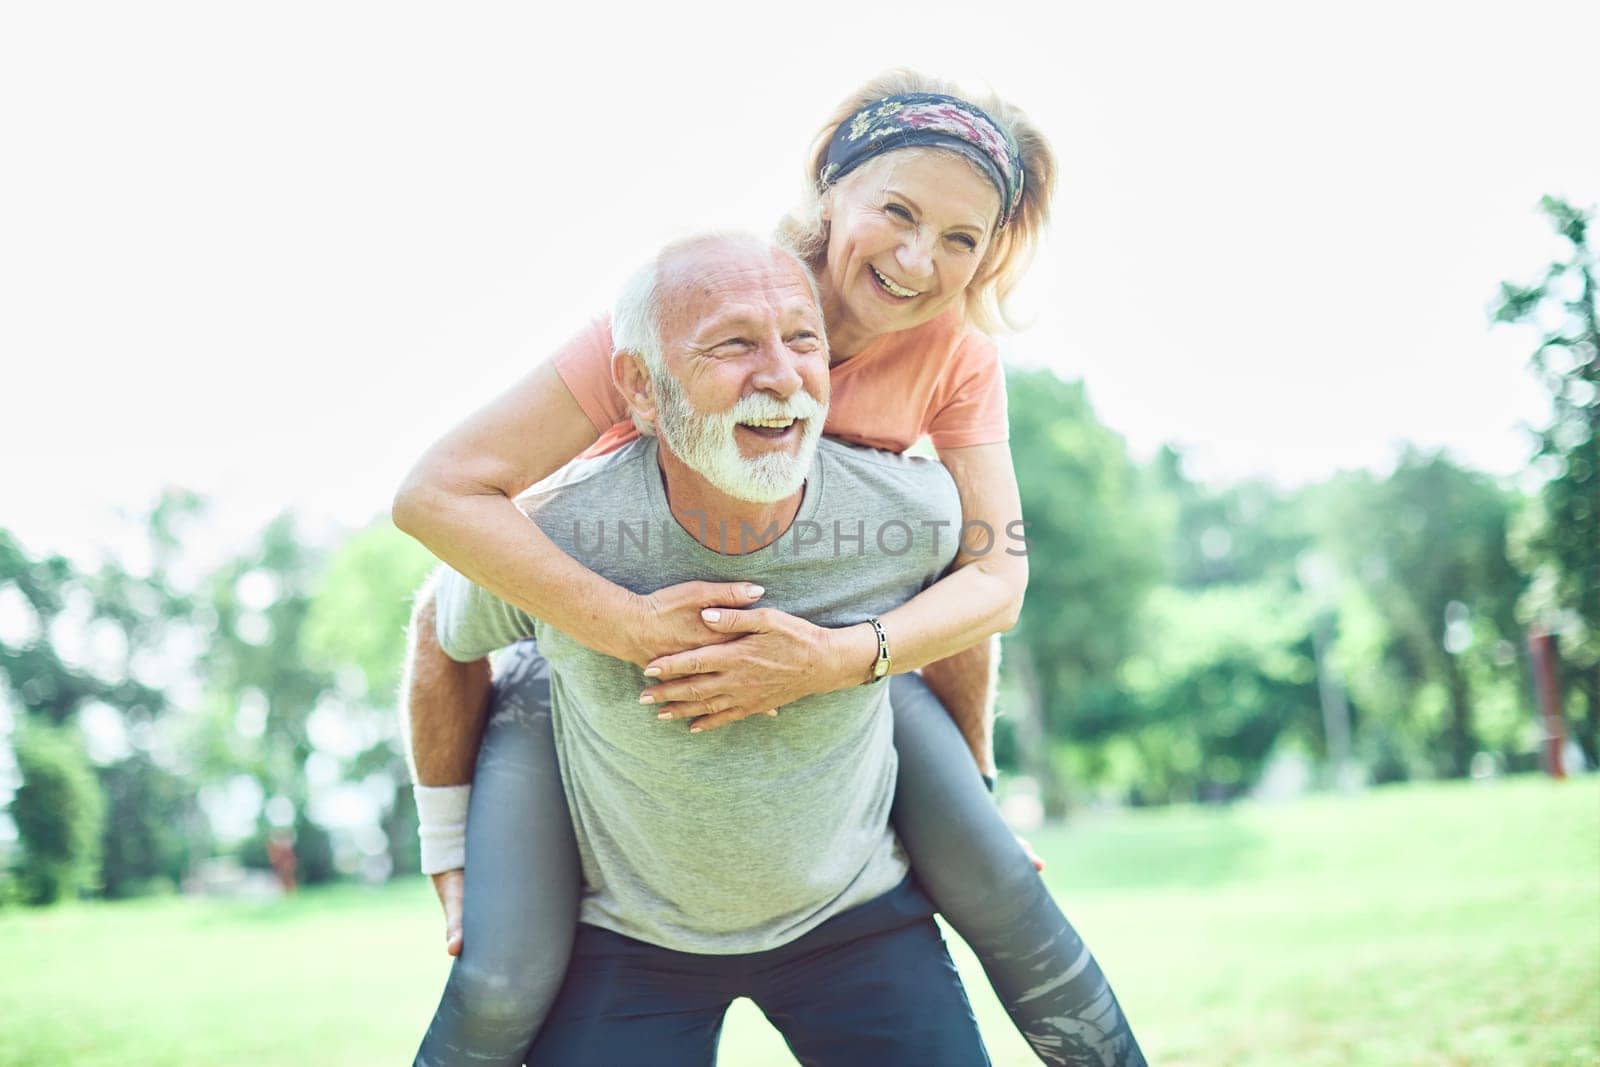 outdoor senior fitness woman man lifestyle active sport exercise healthy fit retirement love fun piggyback by Picsfive